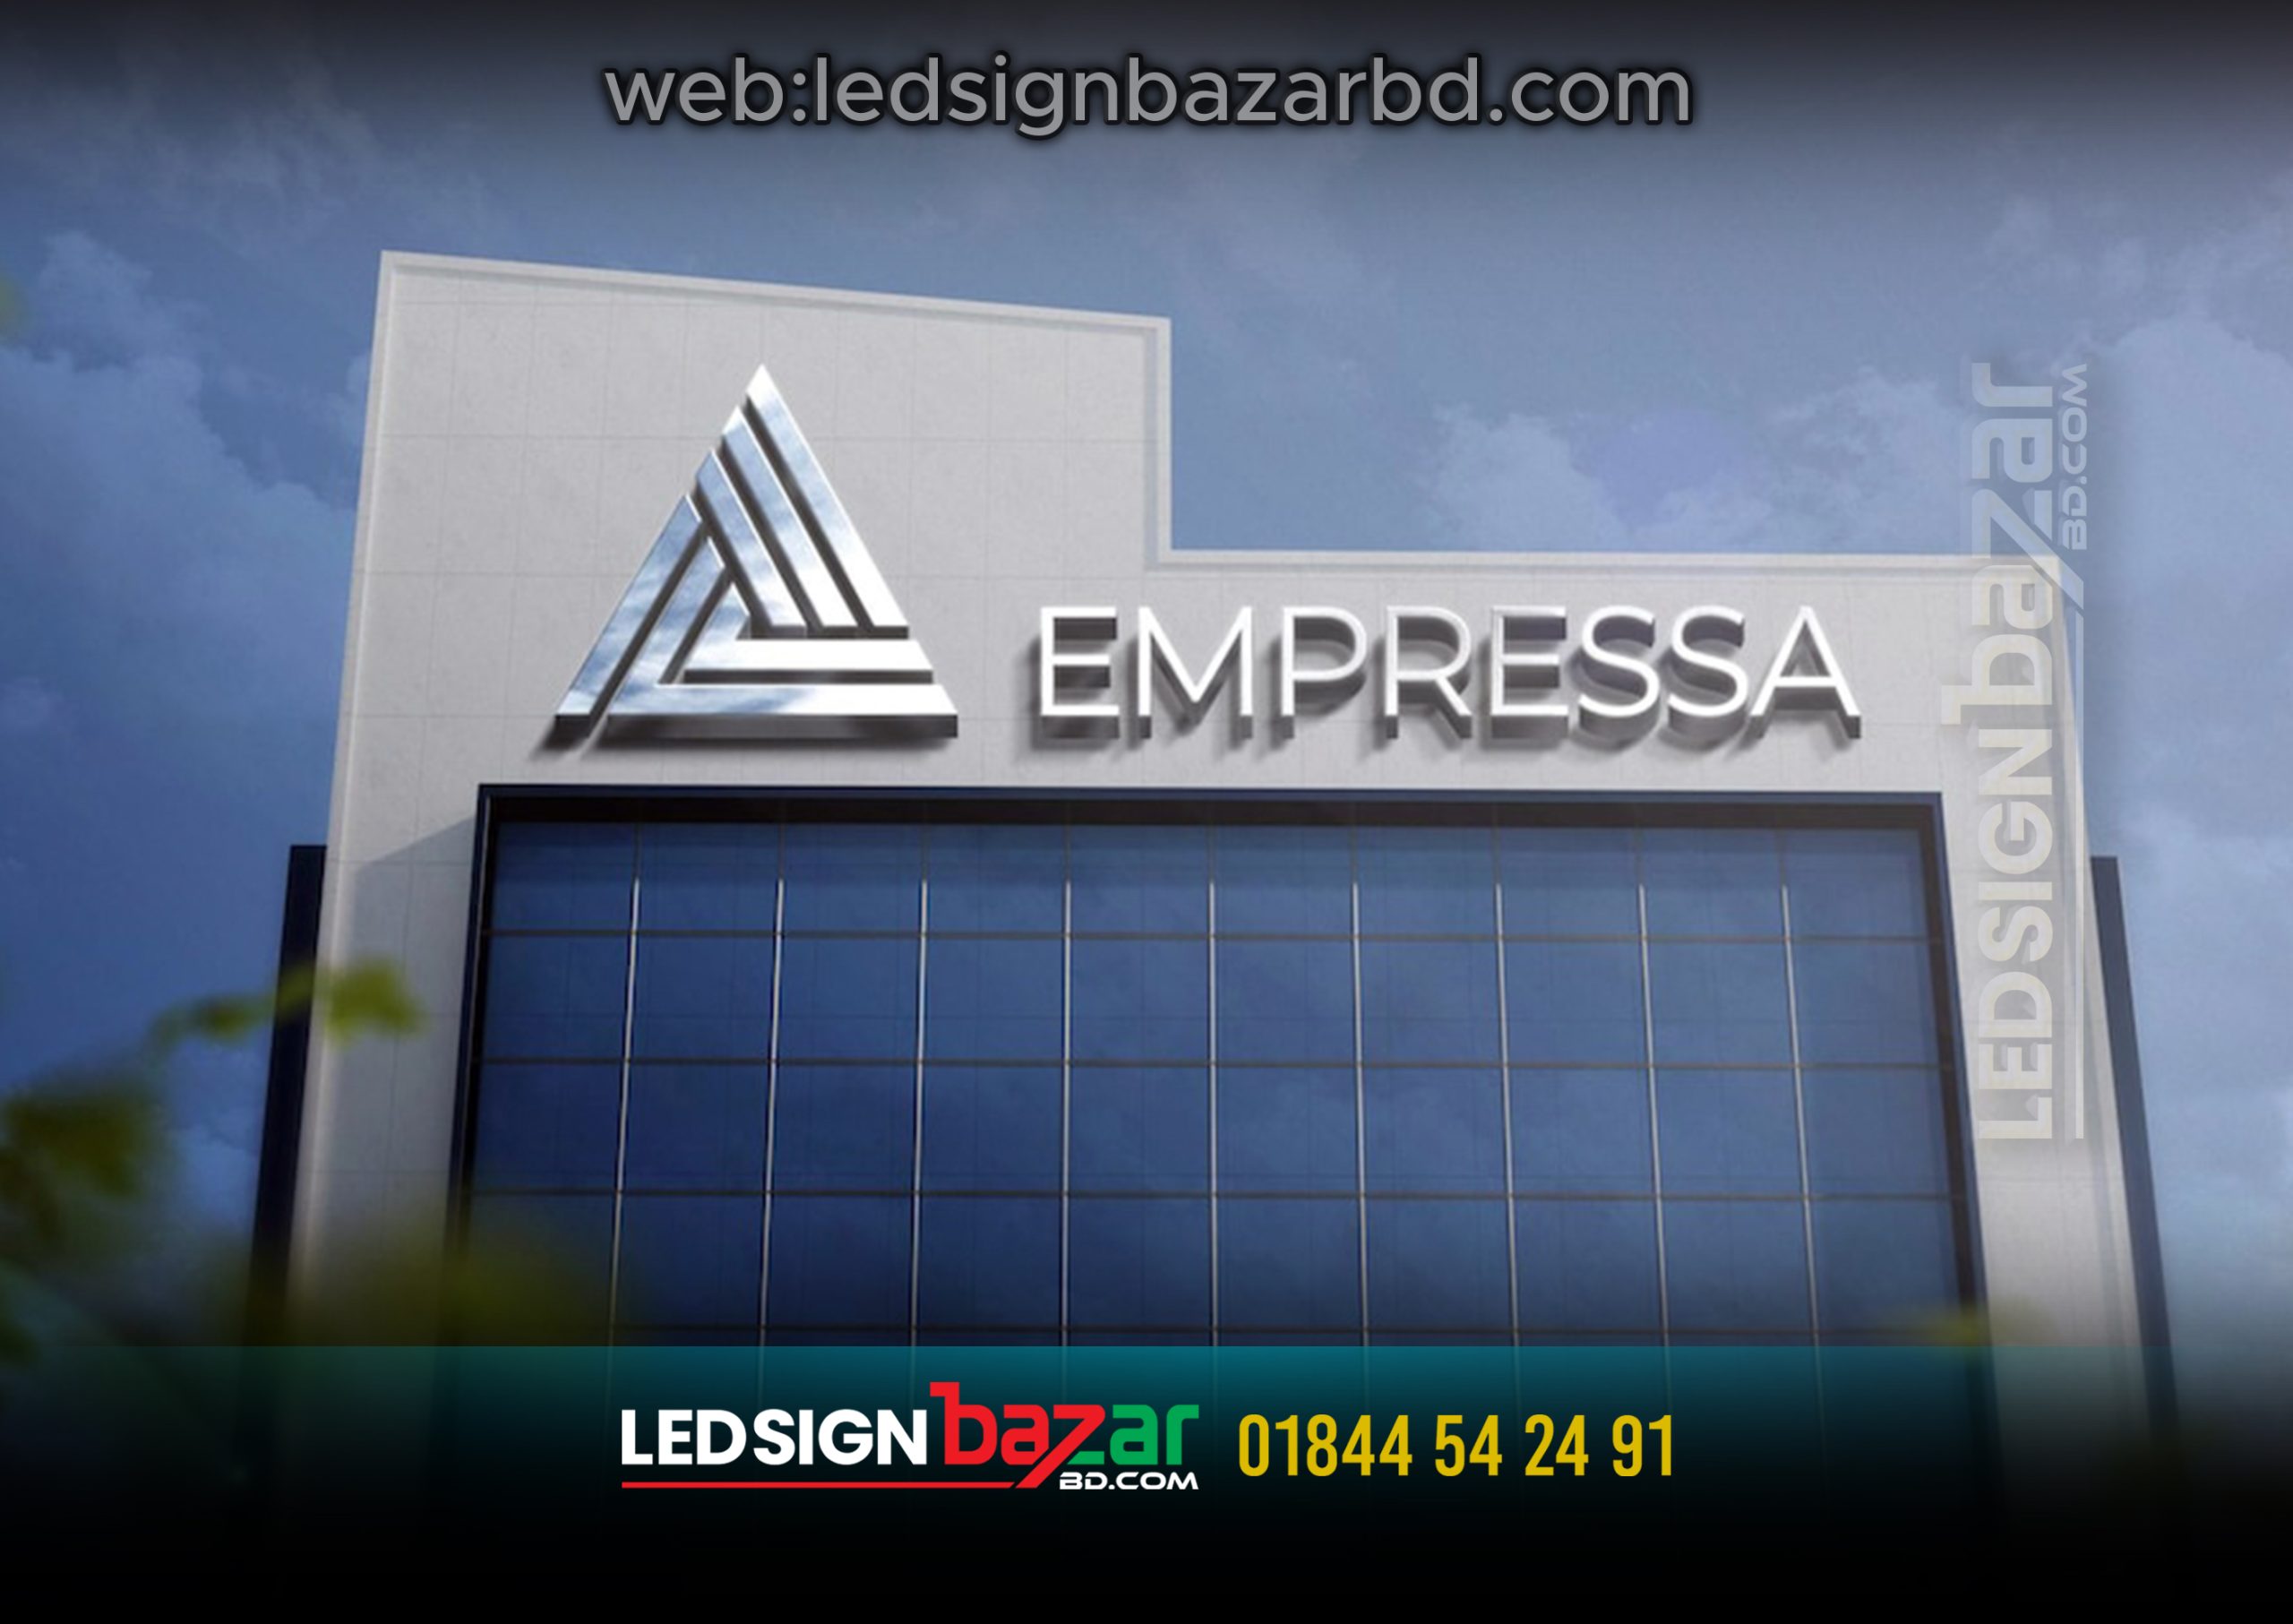 OFFICE NAME SIGNS, SS NAME SIGNS FOR OFFICE LOGO AND HOUSE, EMPRESSA SIGNS BD, BEST LETTER SIGNAGE AGENCY IN BD, SIGNAGE MAKER BD